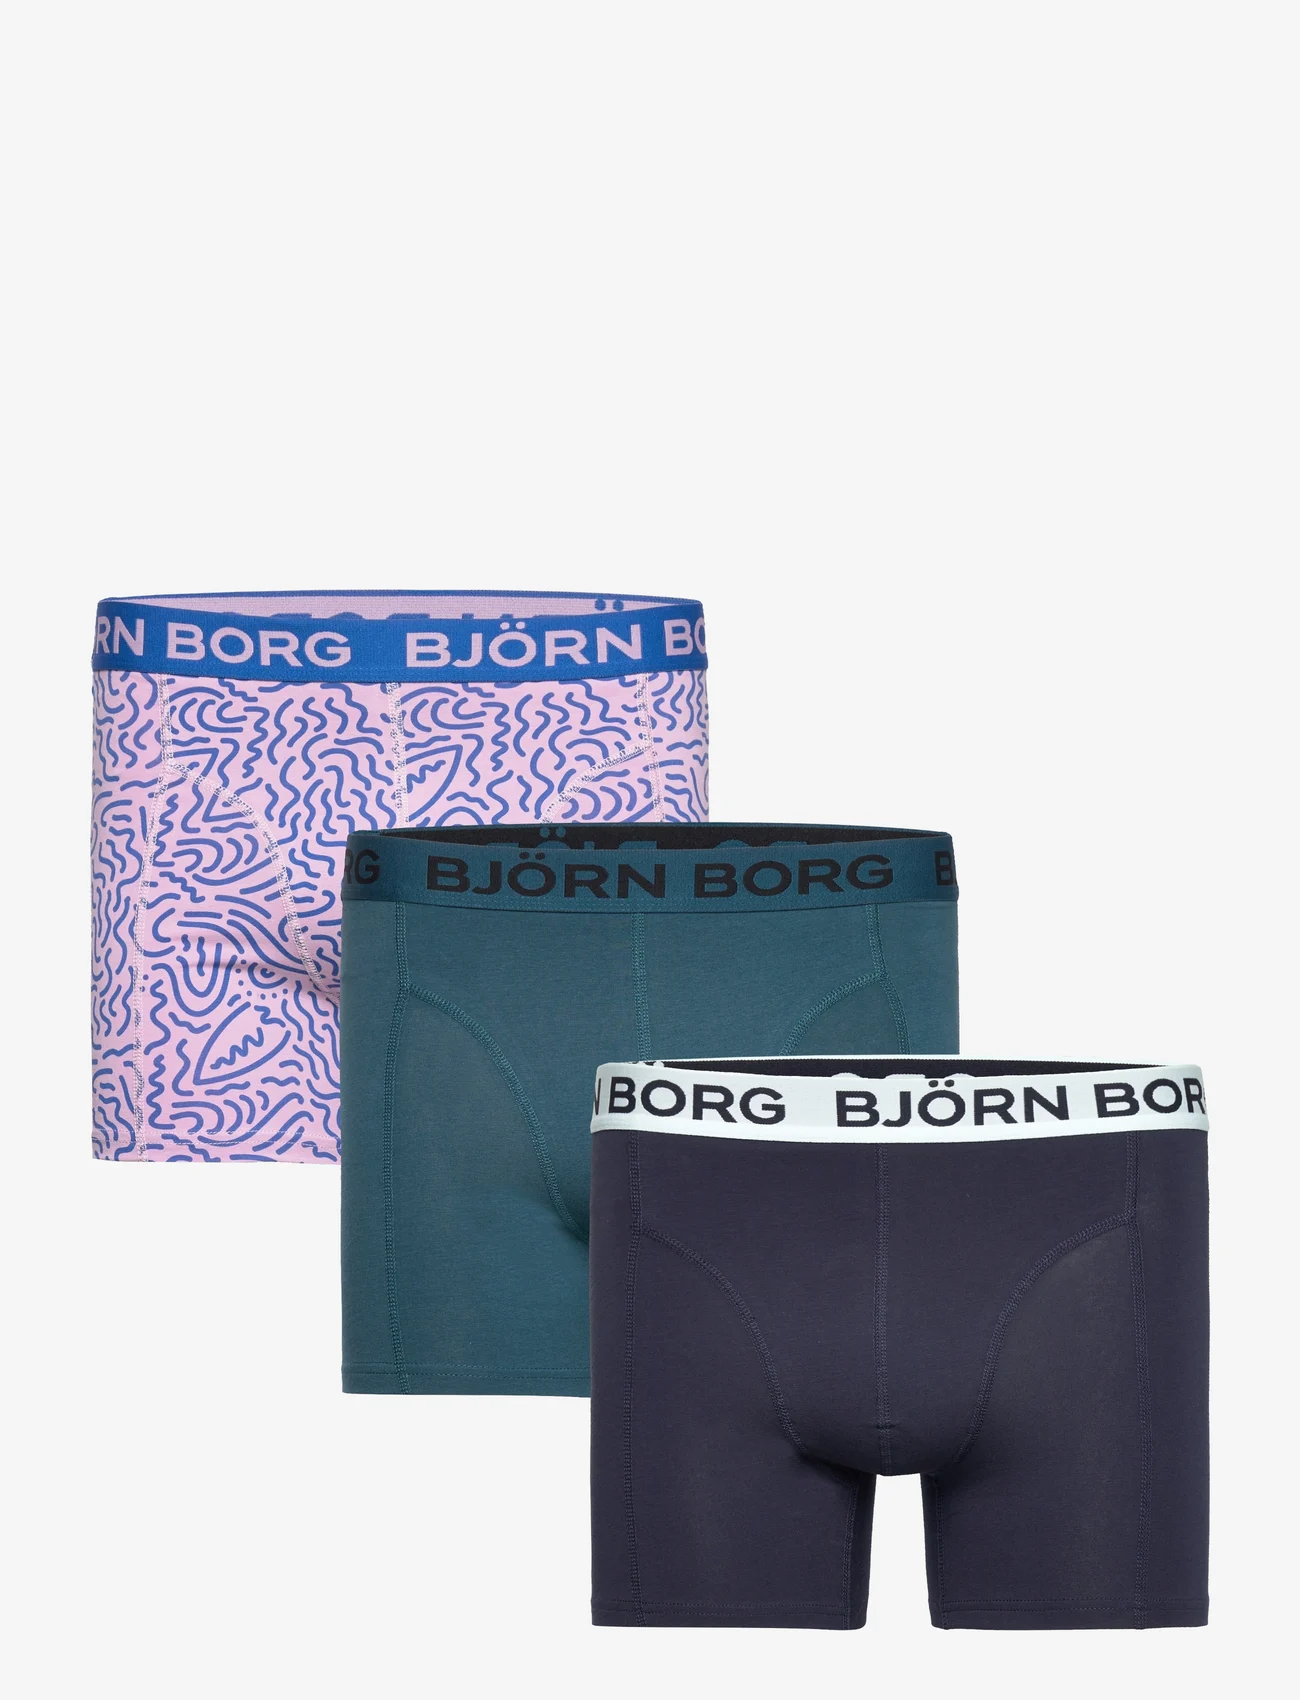 Björn Borg - COTTON STRETCH BOXER 3p - lowest prices - multipack 8 - 0